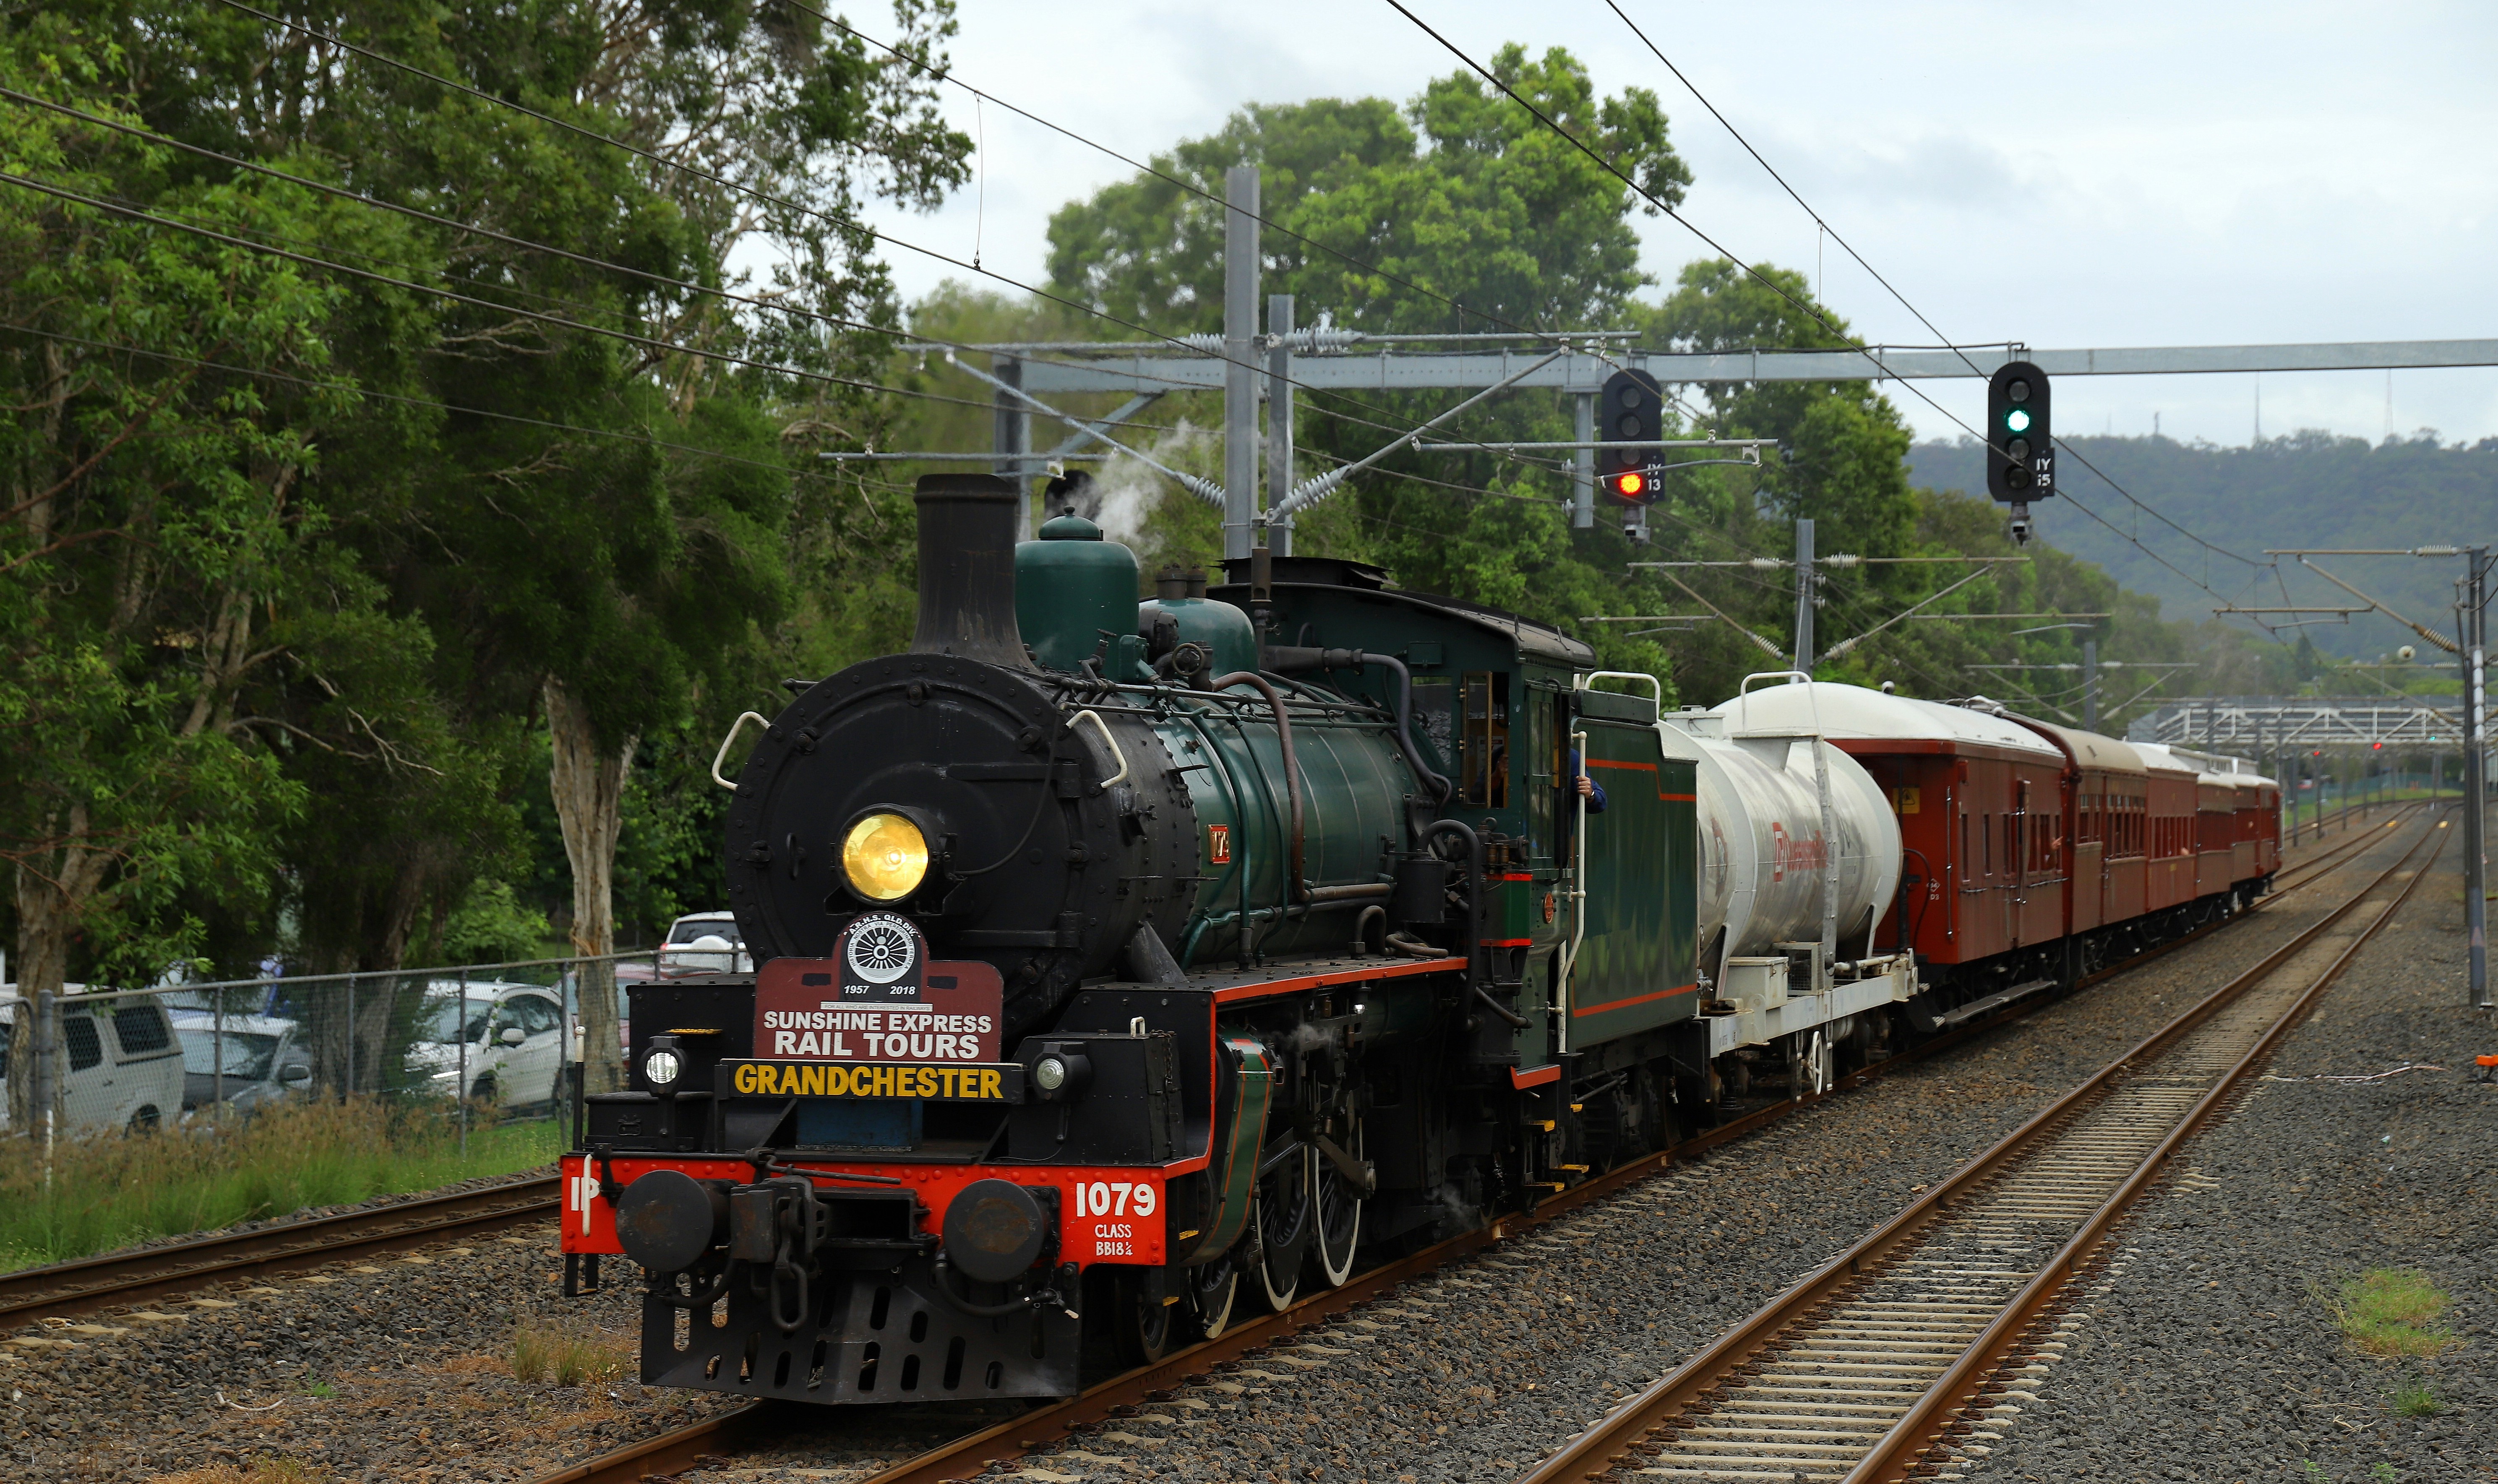 Green steam train on track pulling old carriages